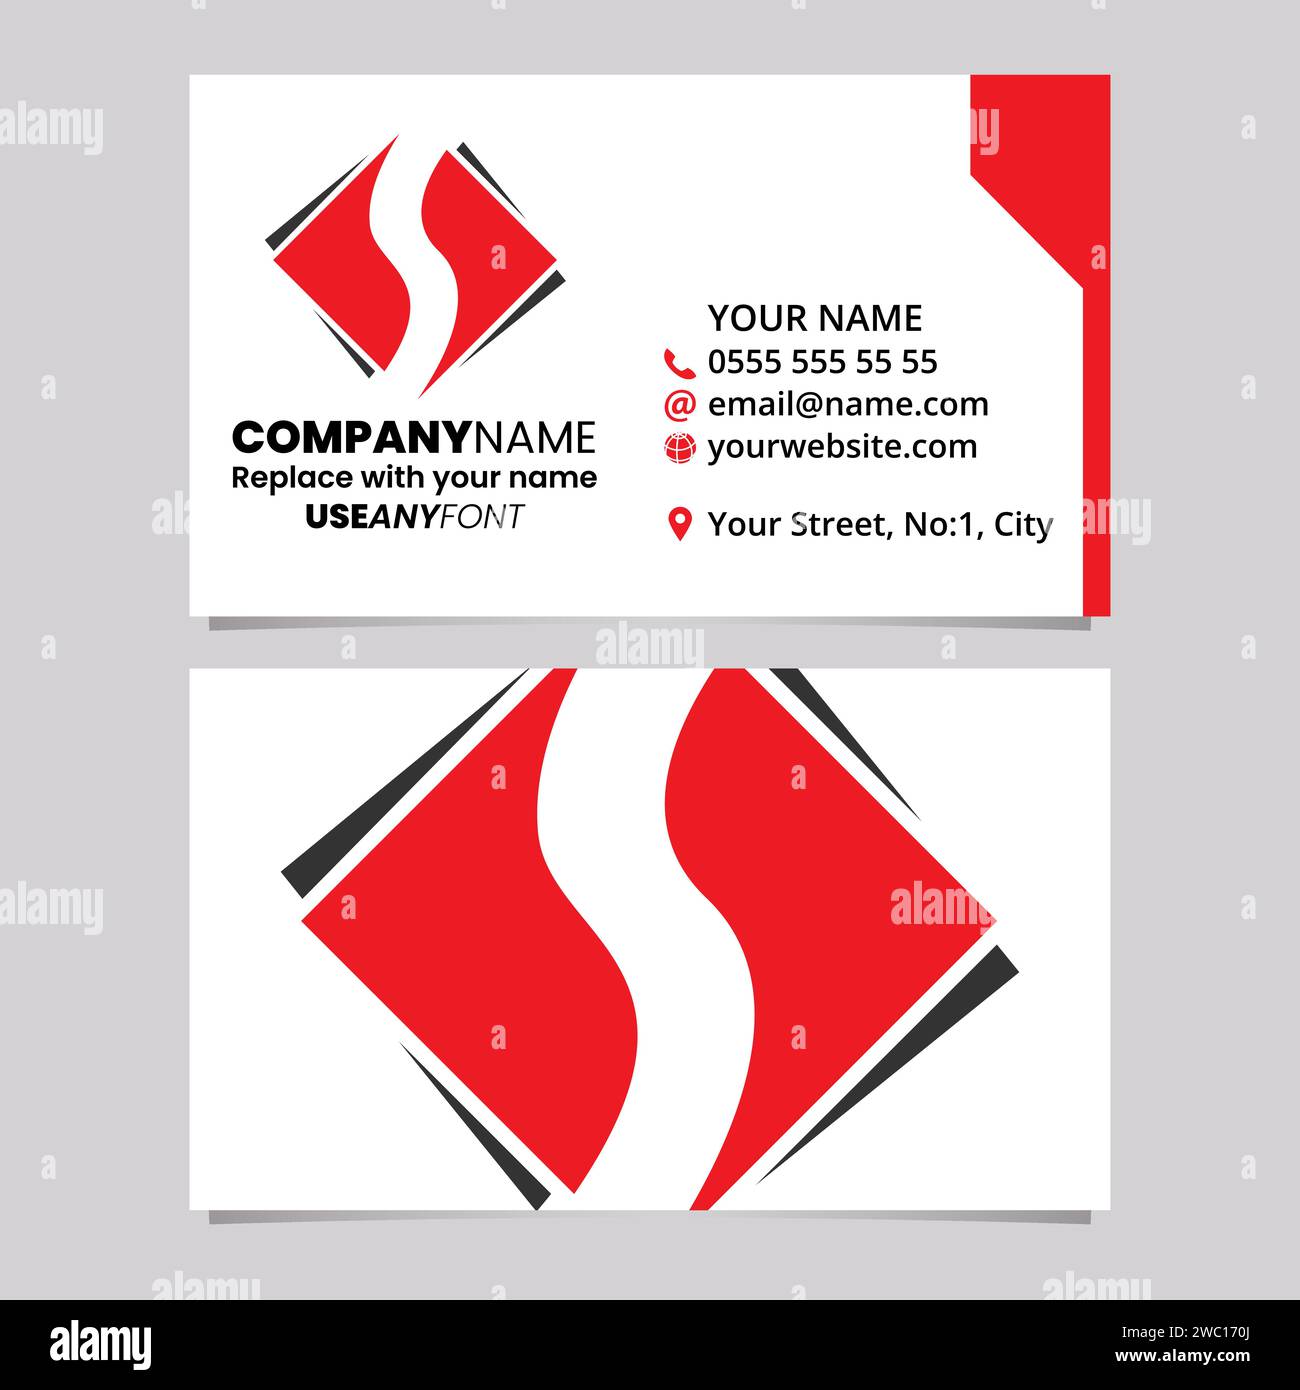 Red and Black Business Card Template with Square Diamond Letter S Logo Icon Over a Light Grey Background Stock Vector